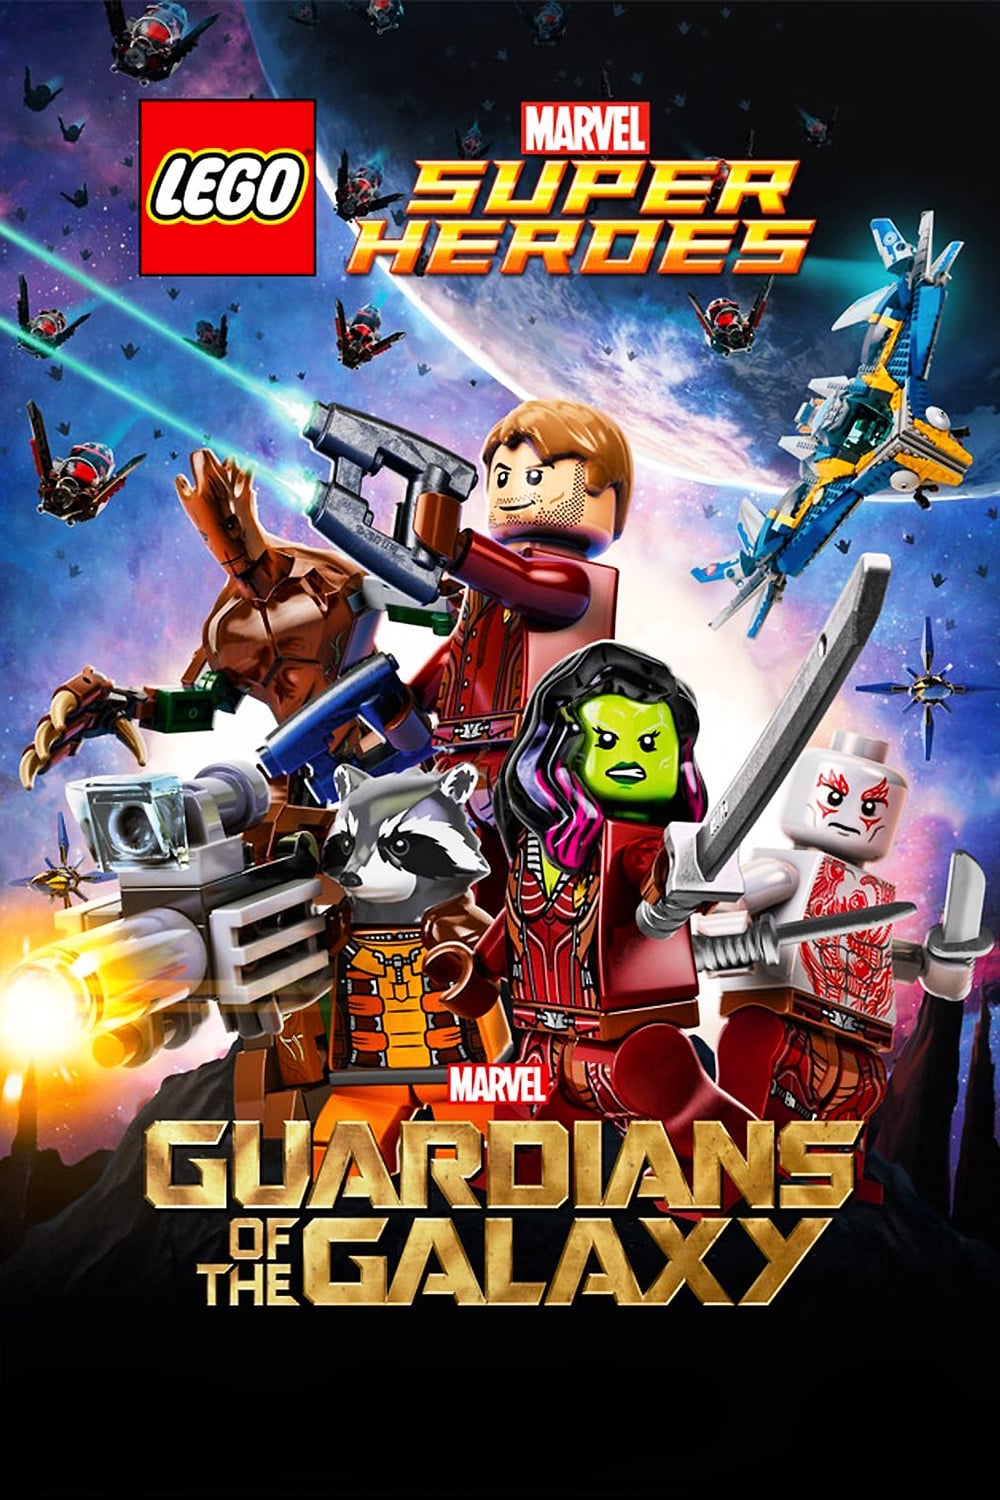 LEGO Marvel Super Heroes: Guardians of the Galaxy - The Thanos Threat (2017)